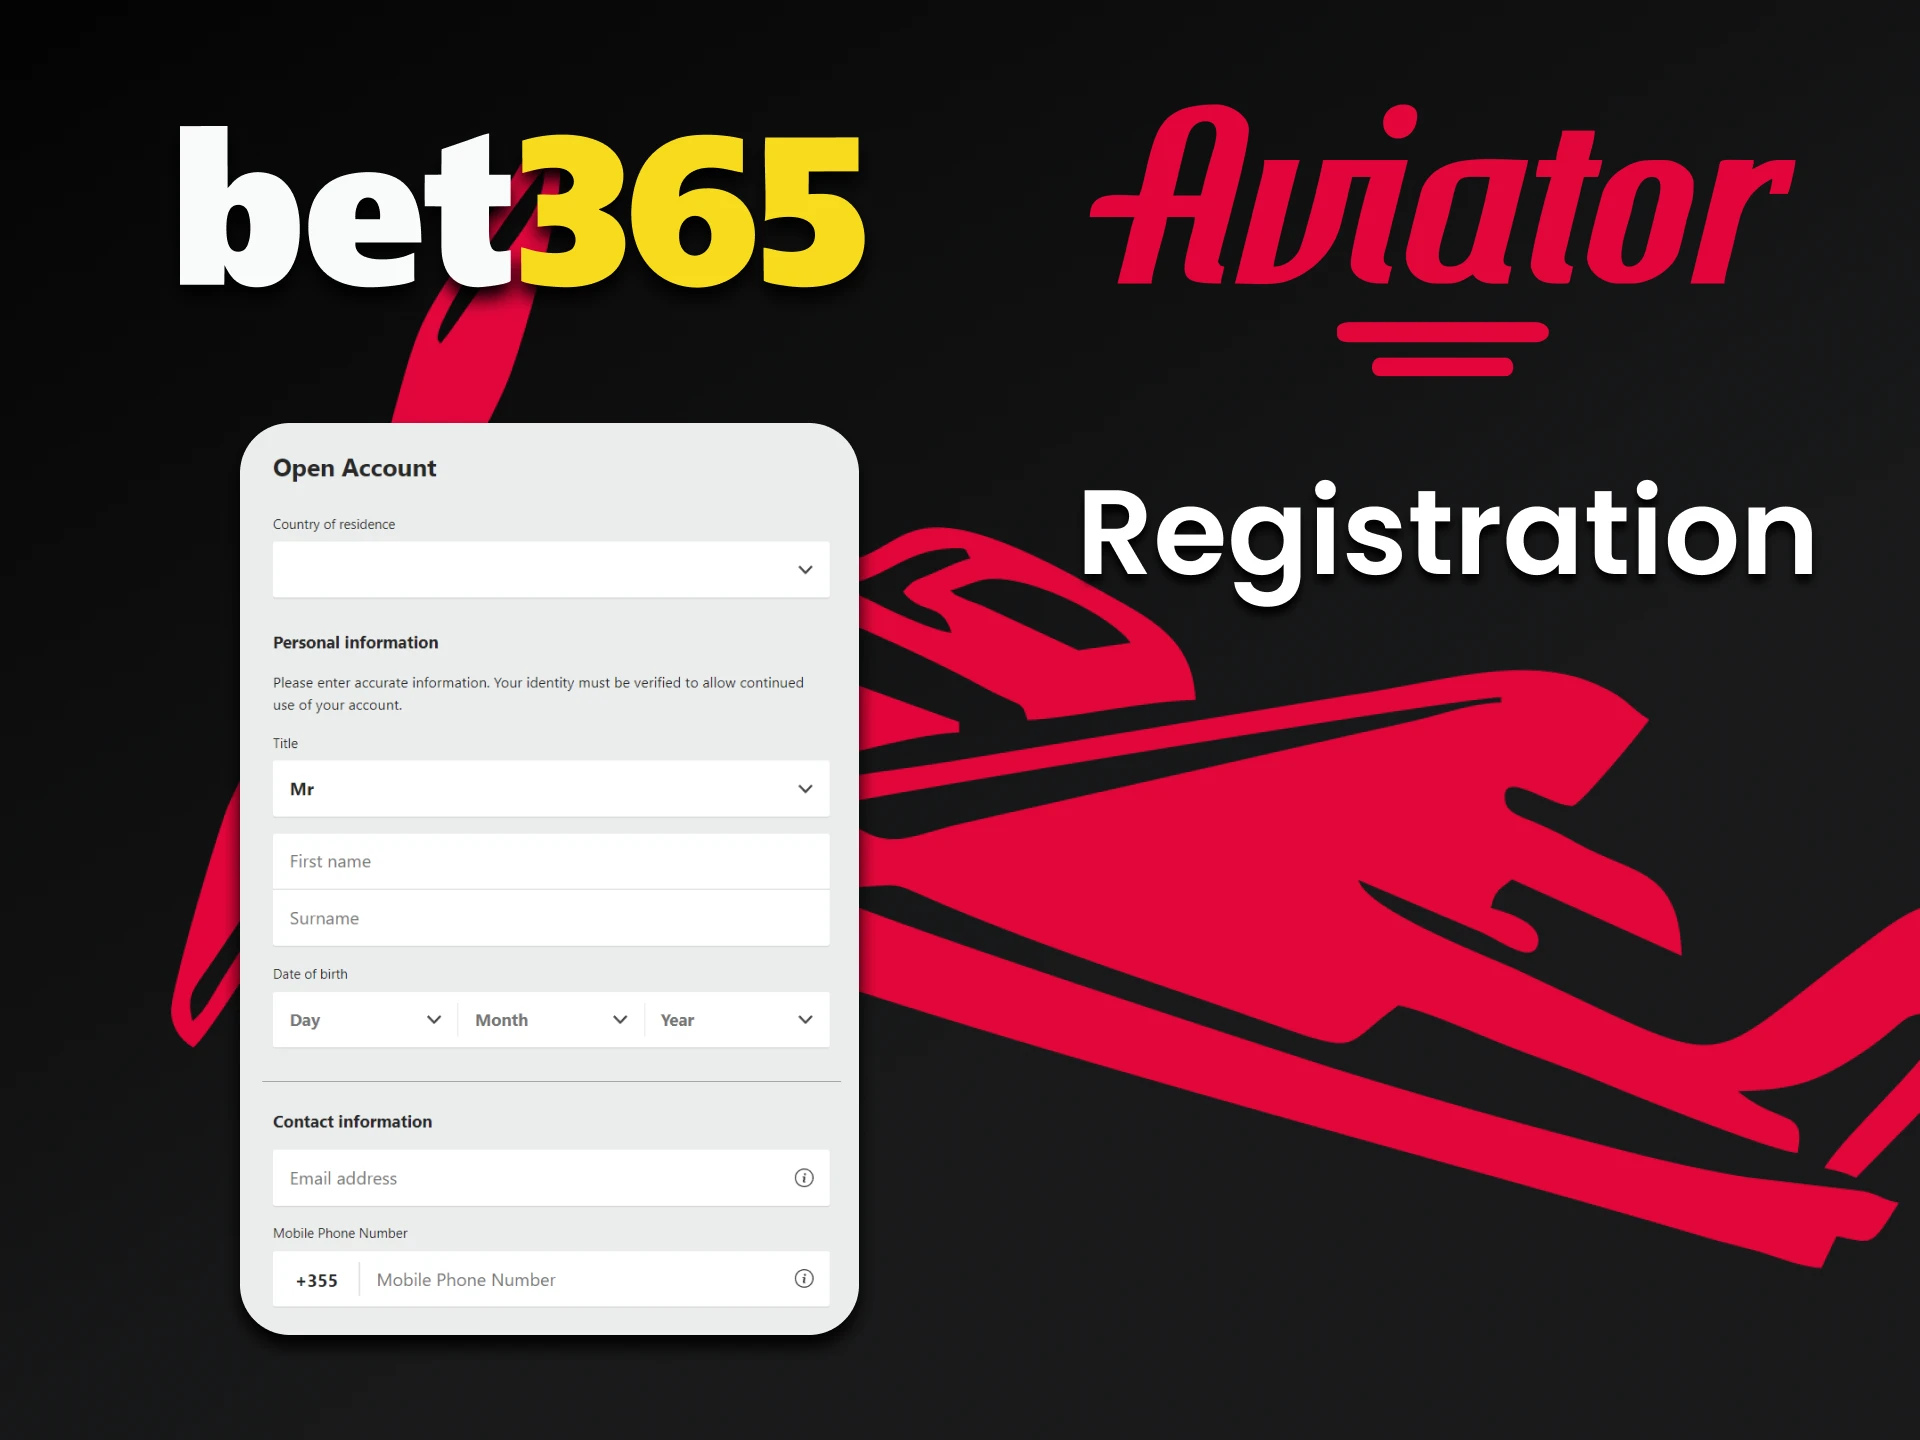 Register at Bet365 to play Aviator.